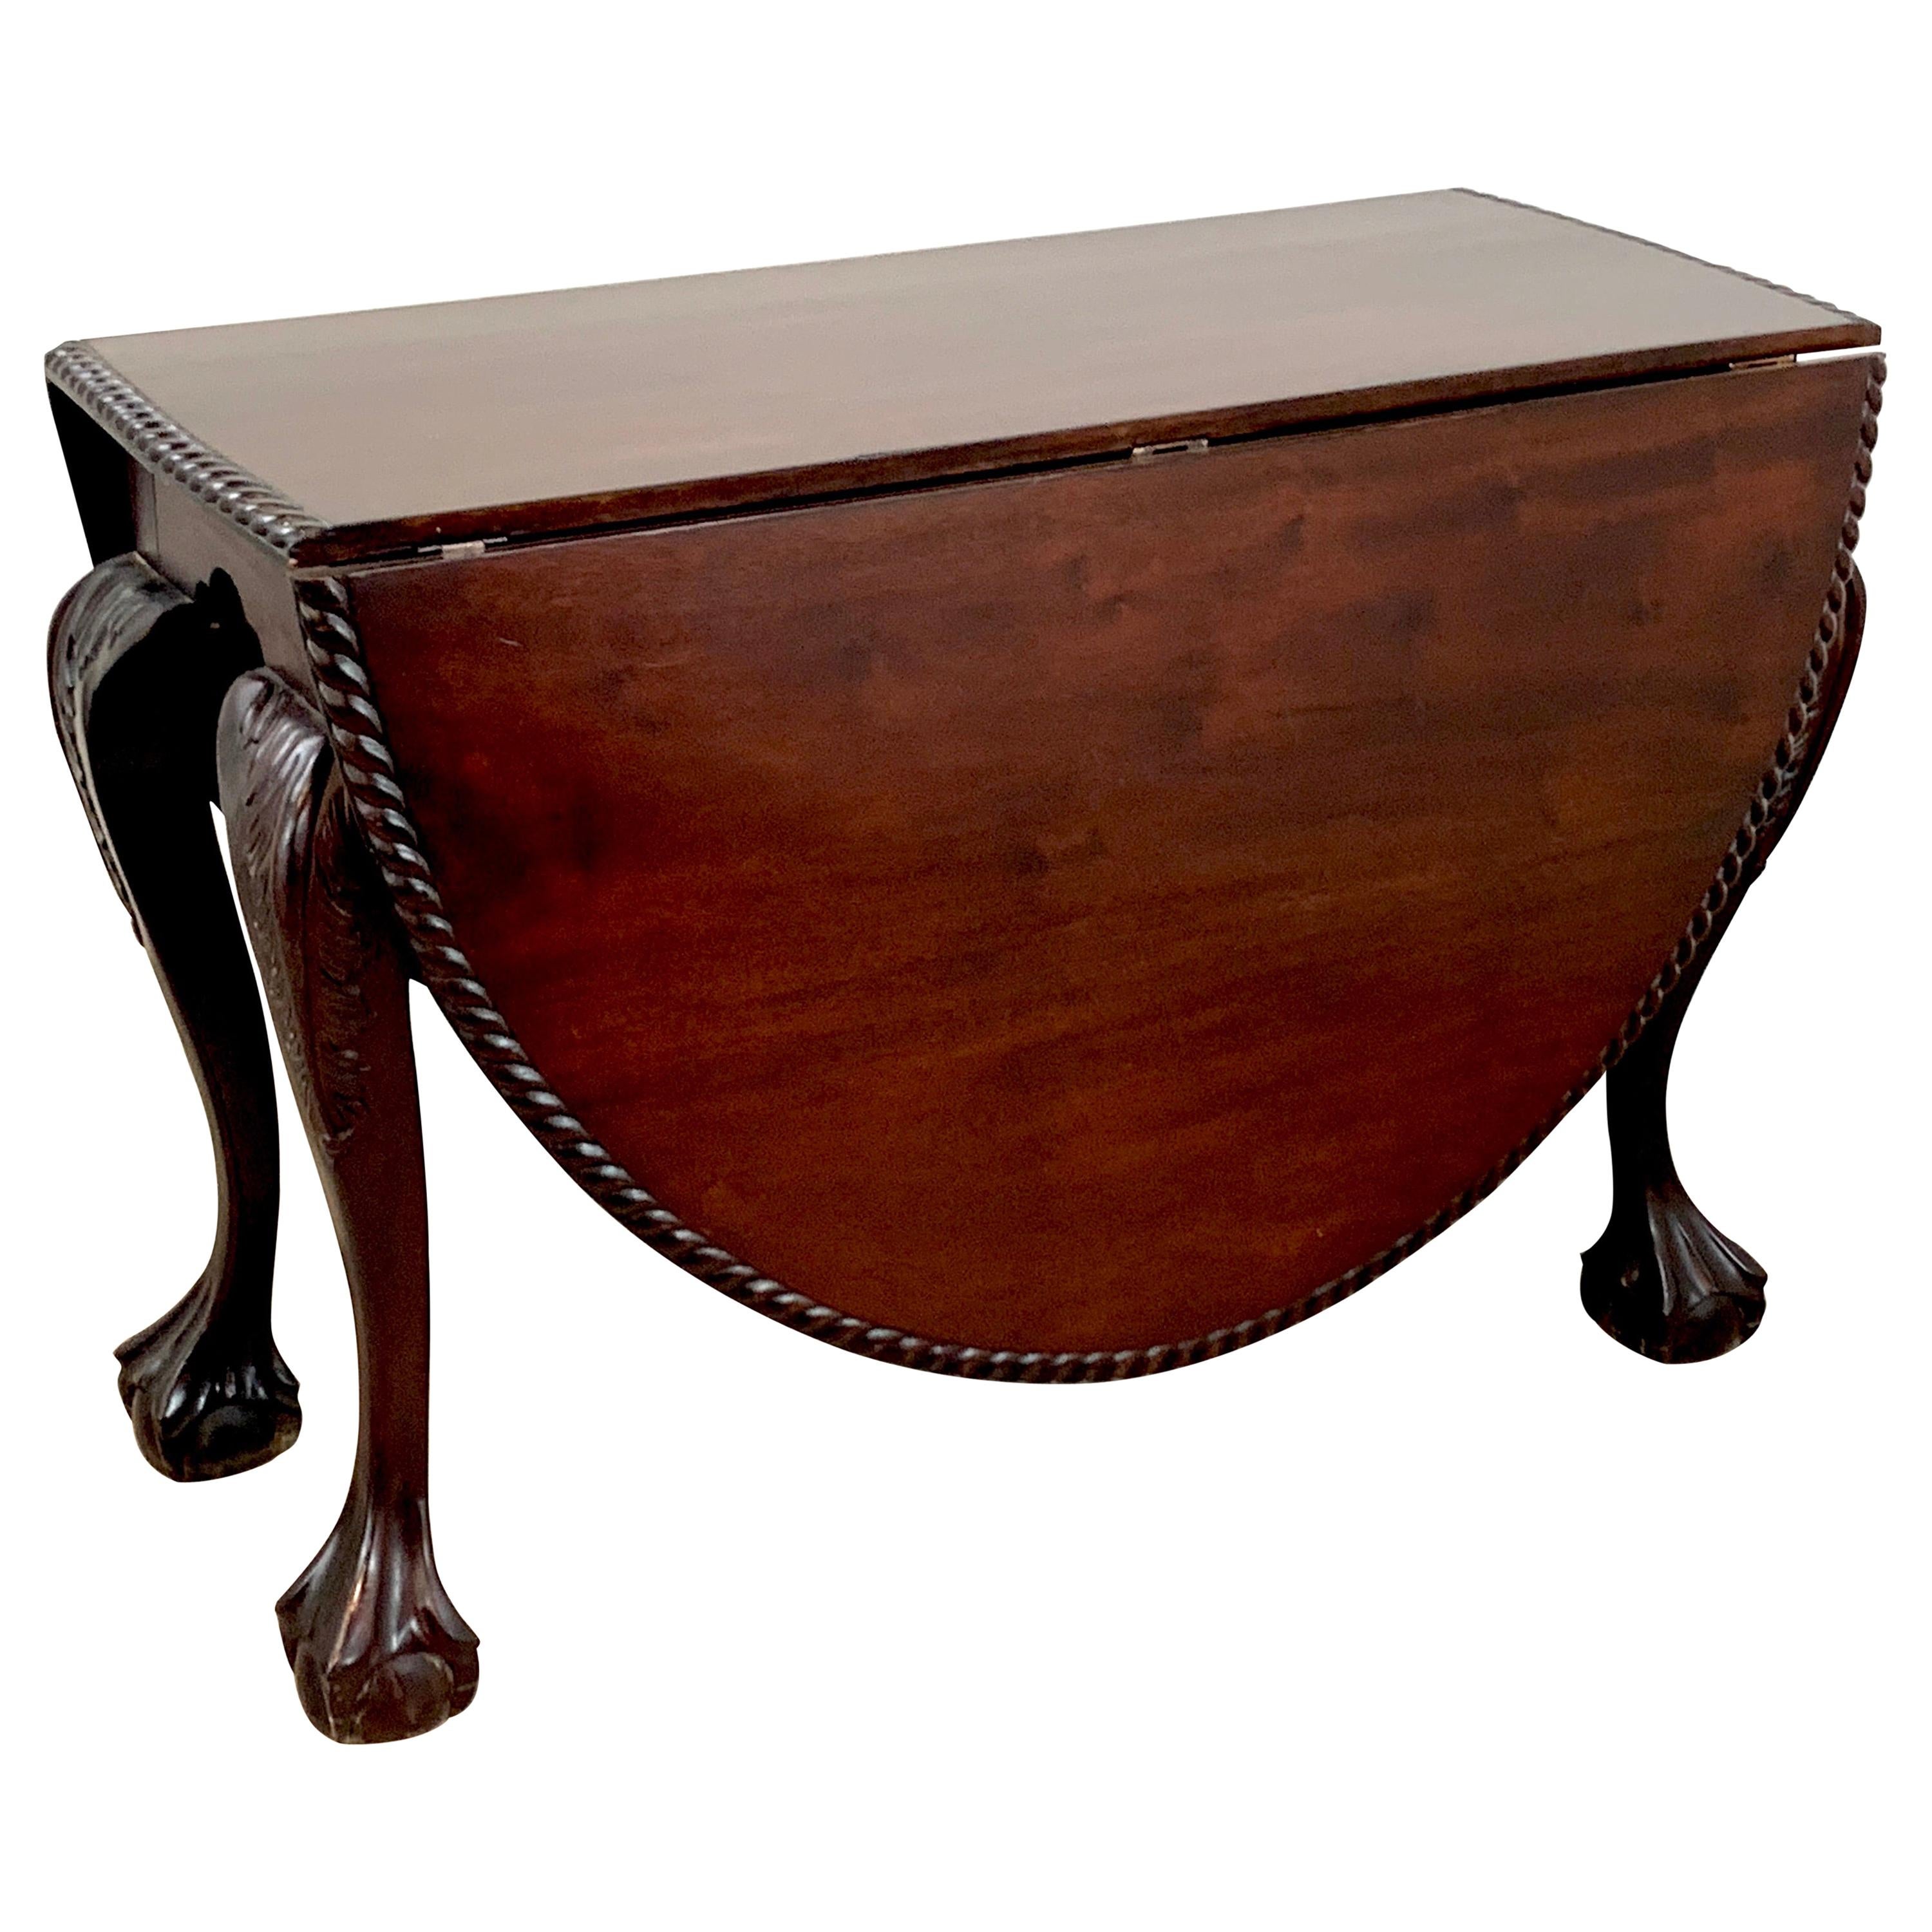 19th Century English Mahogany Ball & Claw Foot Tuck Away Dining Room Table For Sale